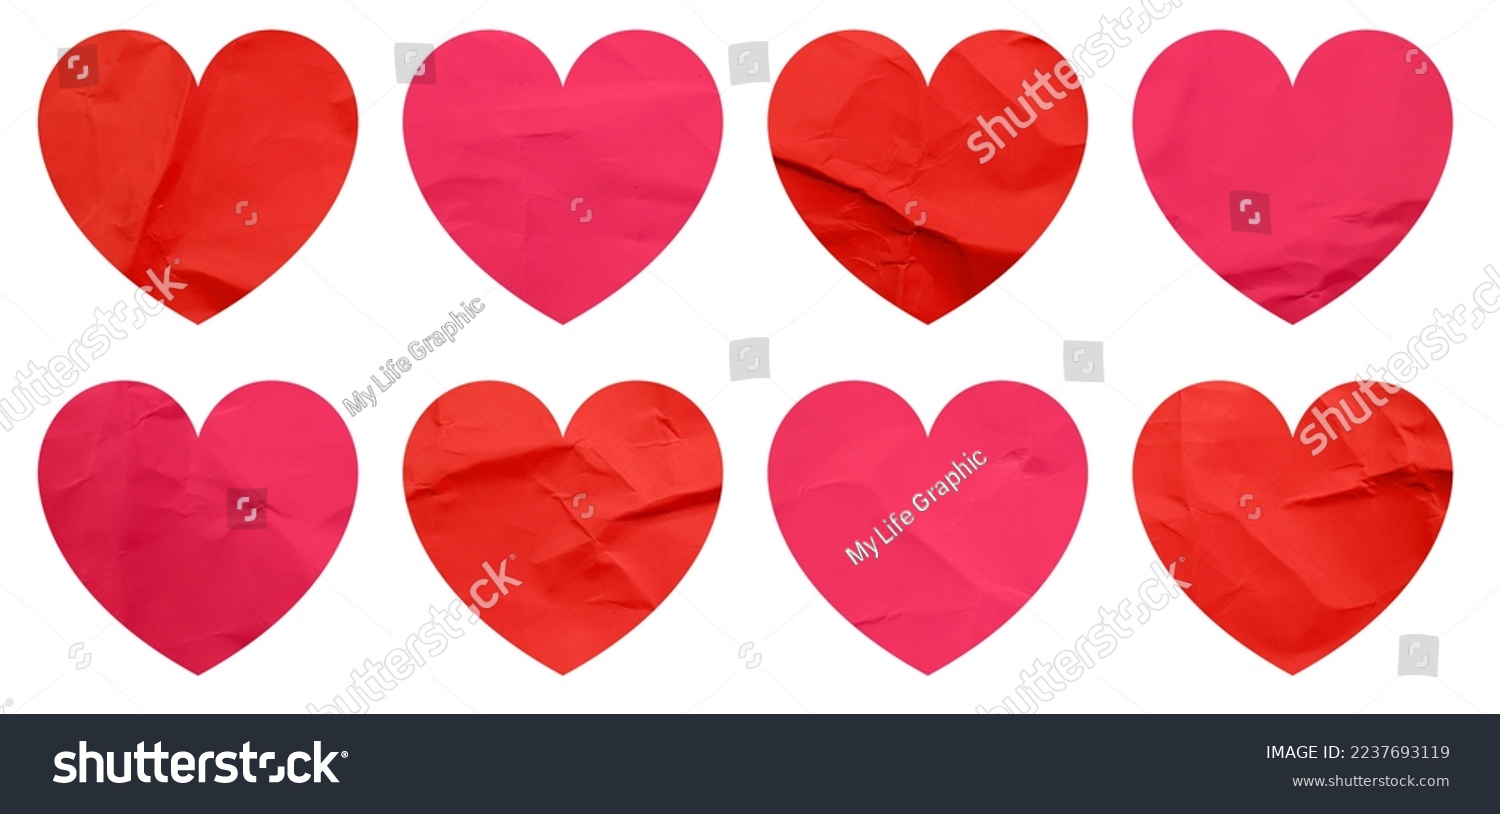 Set of heart shapes red and pink paper stickers, Mock up blank tags labels, isolated on white background with clipping path #2237693119